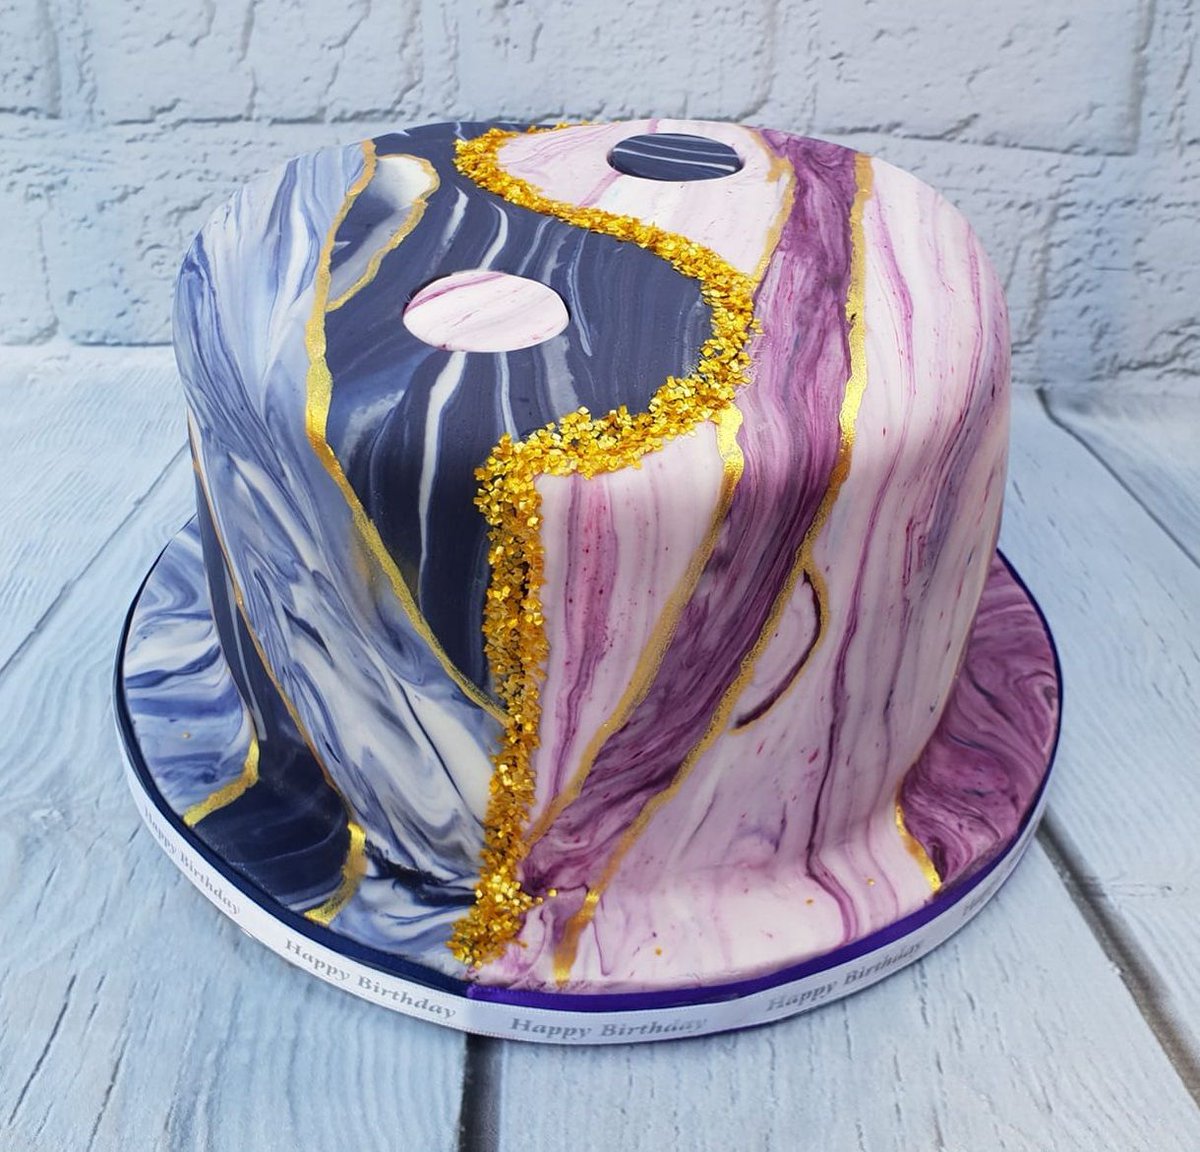 This stunning Ying and Yang cake was made as a birthday present for a couple who share the same birthday. 🎂🎉 Made with our Madeira Cake Mix. Thank you customer Karen for sharing!